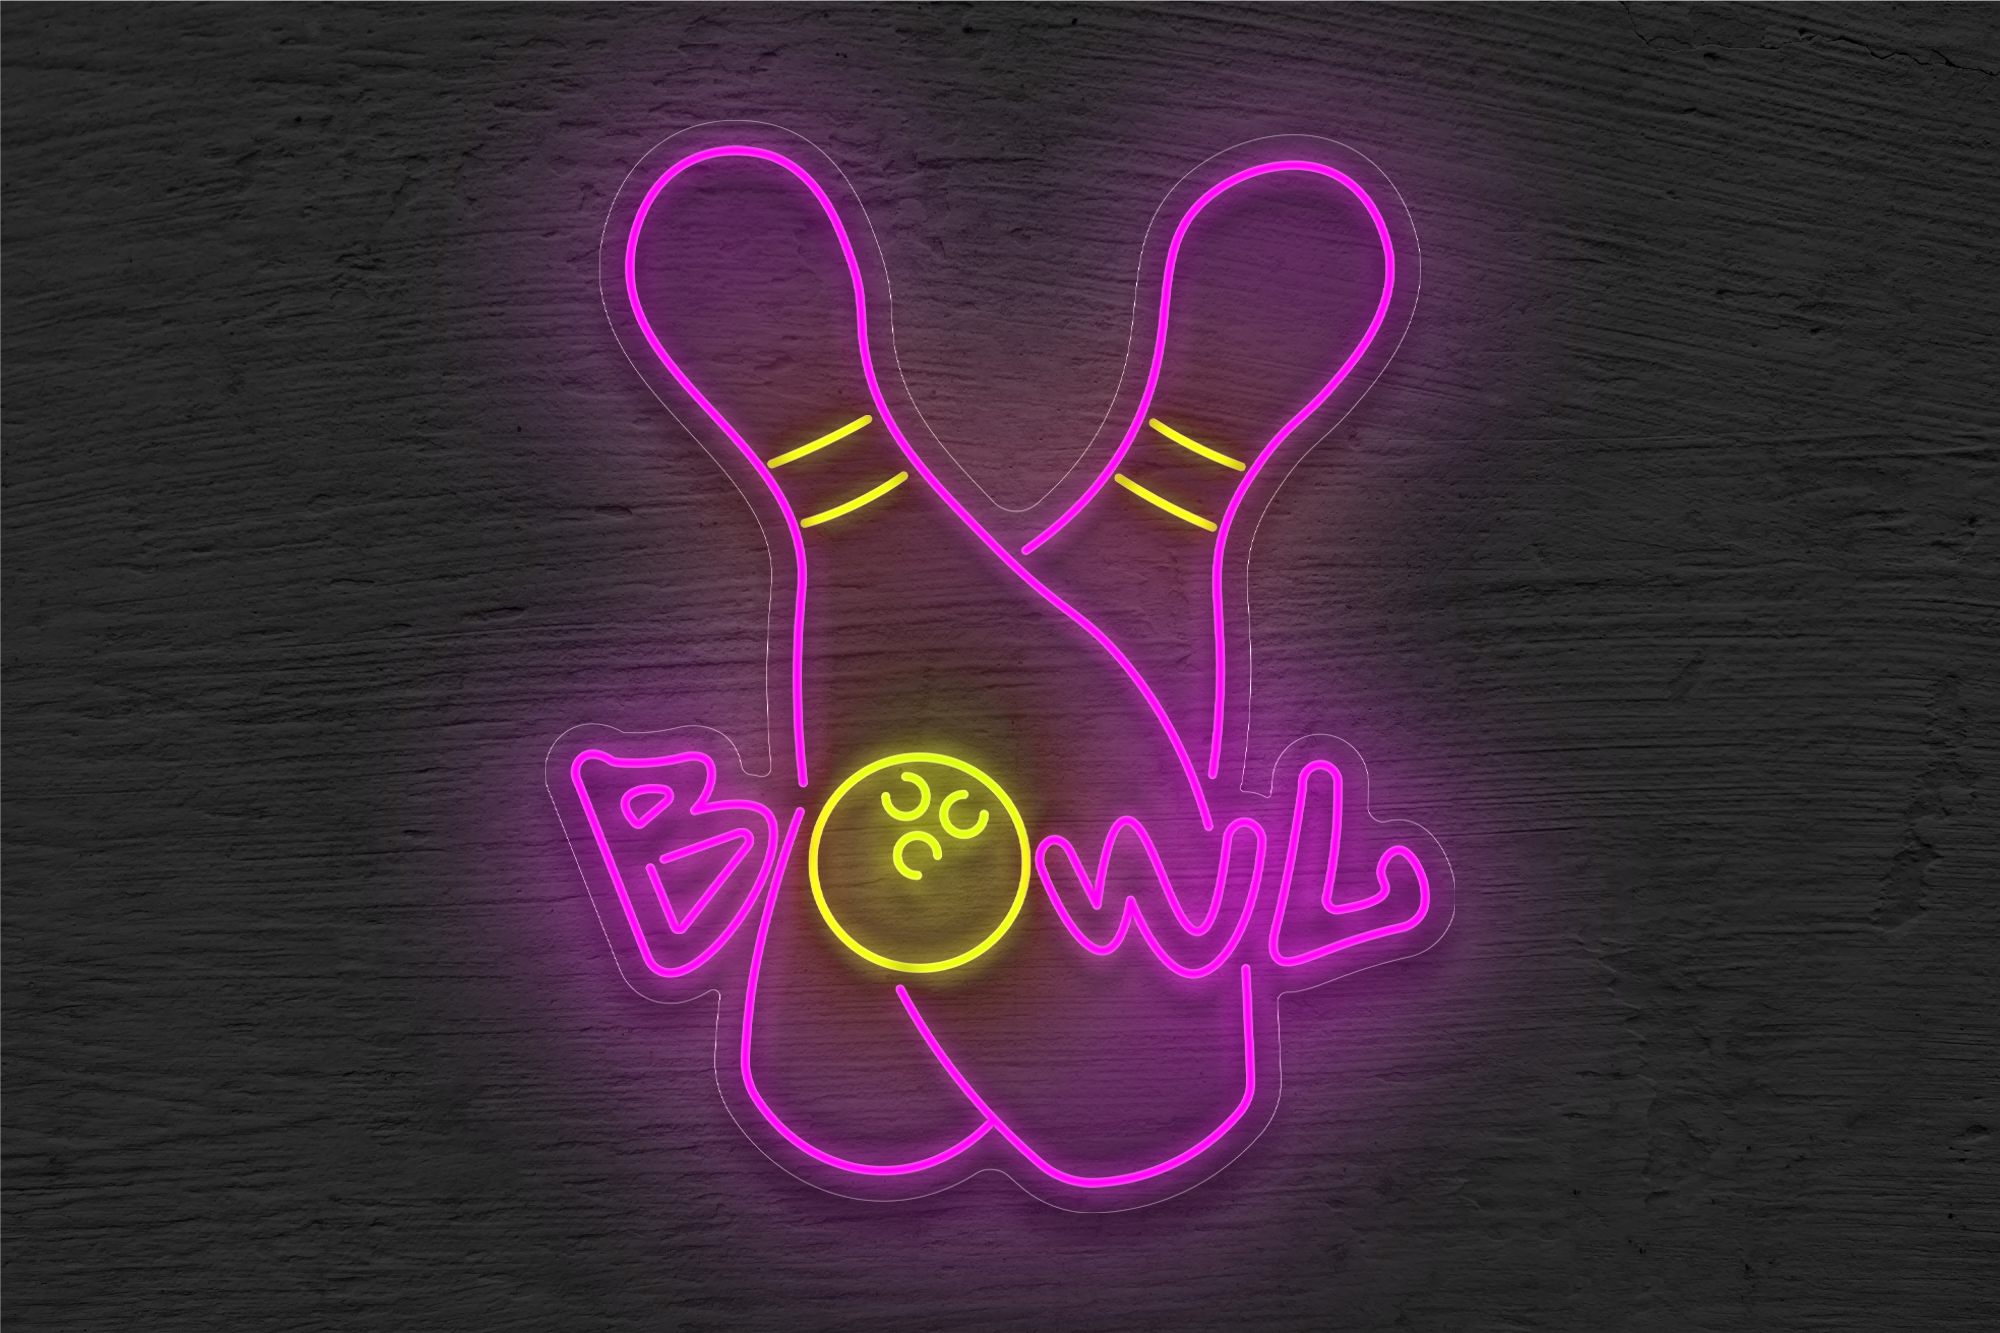 "Bowl" with 2 Pins LED Neon Sign